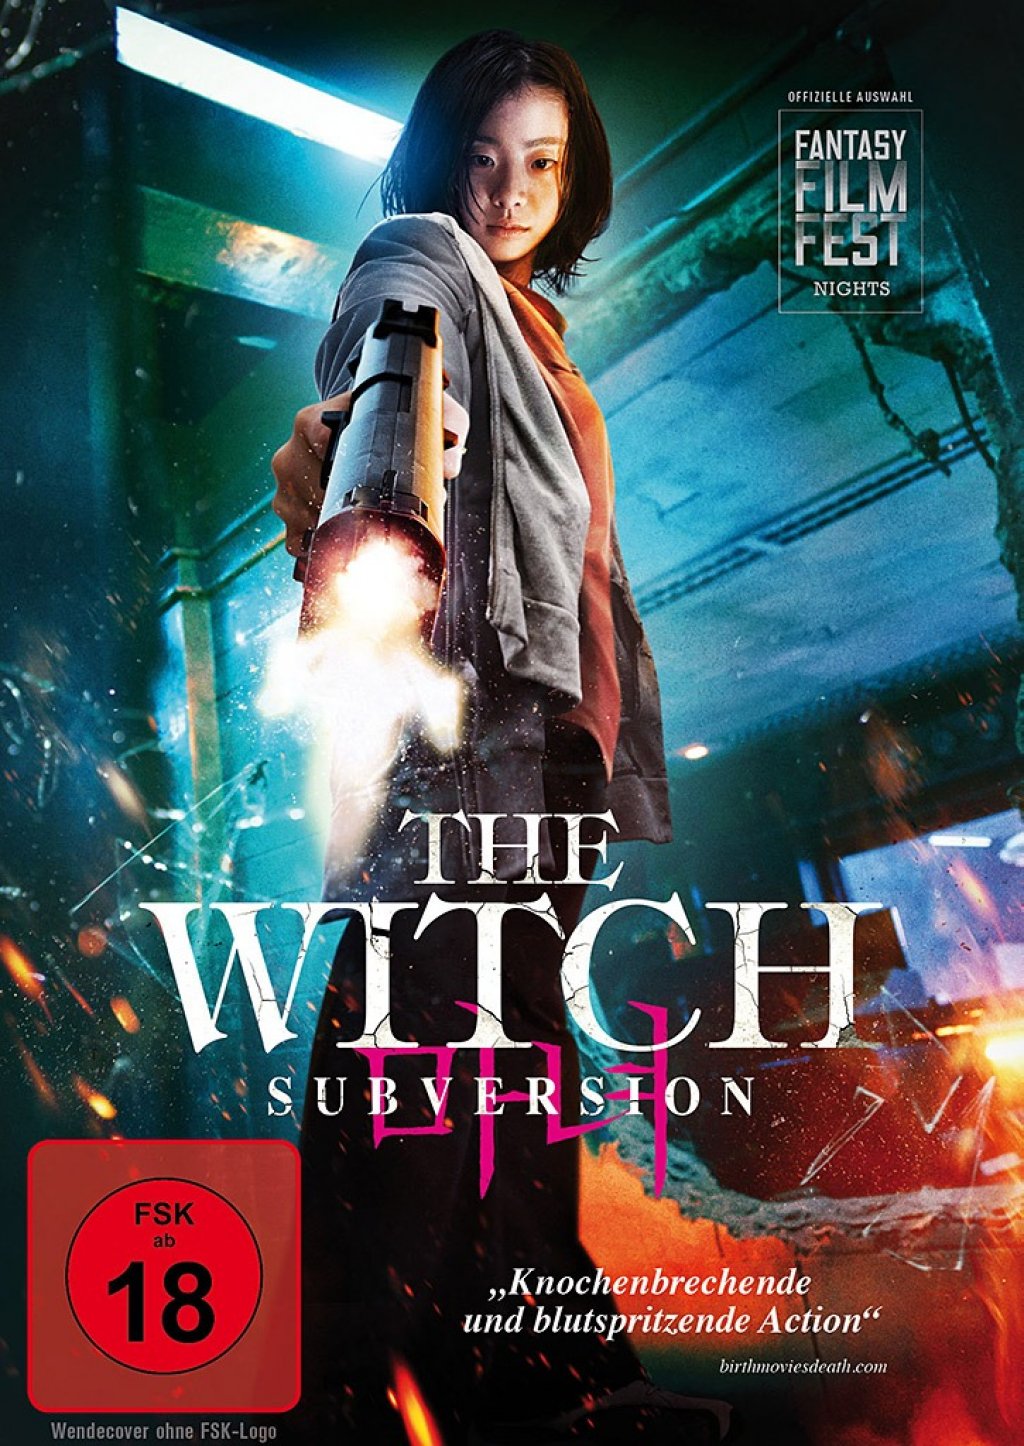 the witch part 1. the subversion sequel